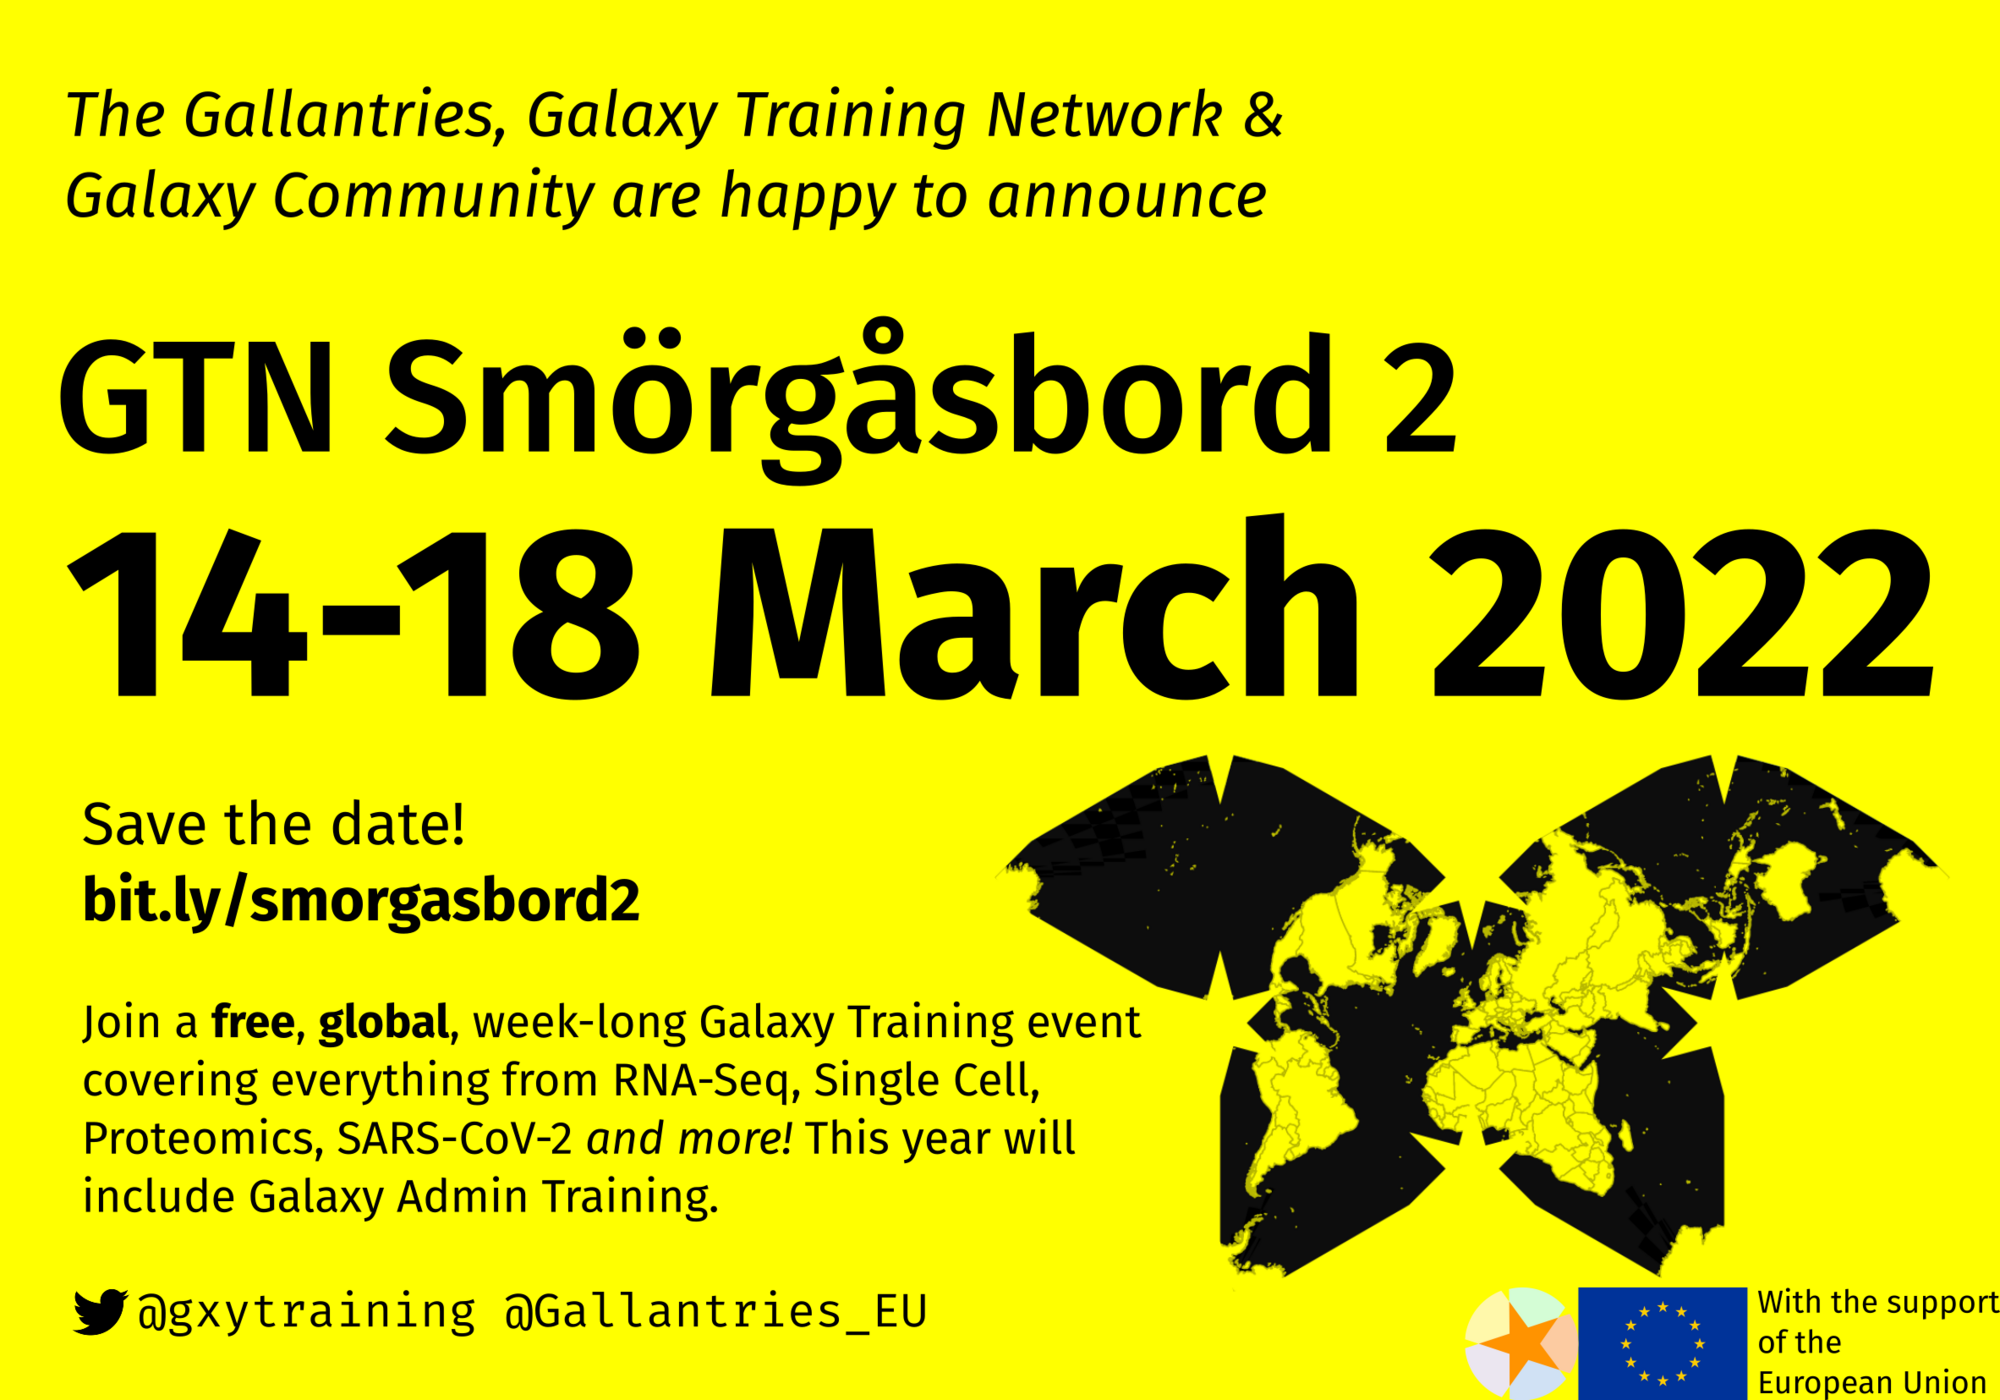 Black text on a yellow background. Title card for Smörgåsbord 2 announcing that it will be 14-18 march in very large text, and the highlights of the course like Single Cell, Proteomics, SARS-CoV-2 and galaxy admin training. A bitly link is included which redirects to this page. There is a watterman butterfly map projection of the earth indicating it is a global event as well as an EU flag and GTN logo of supporters. @gxytraining and @Gallantries_EU's twitter handles are linked.